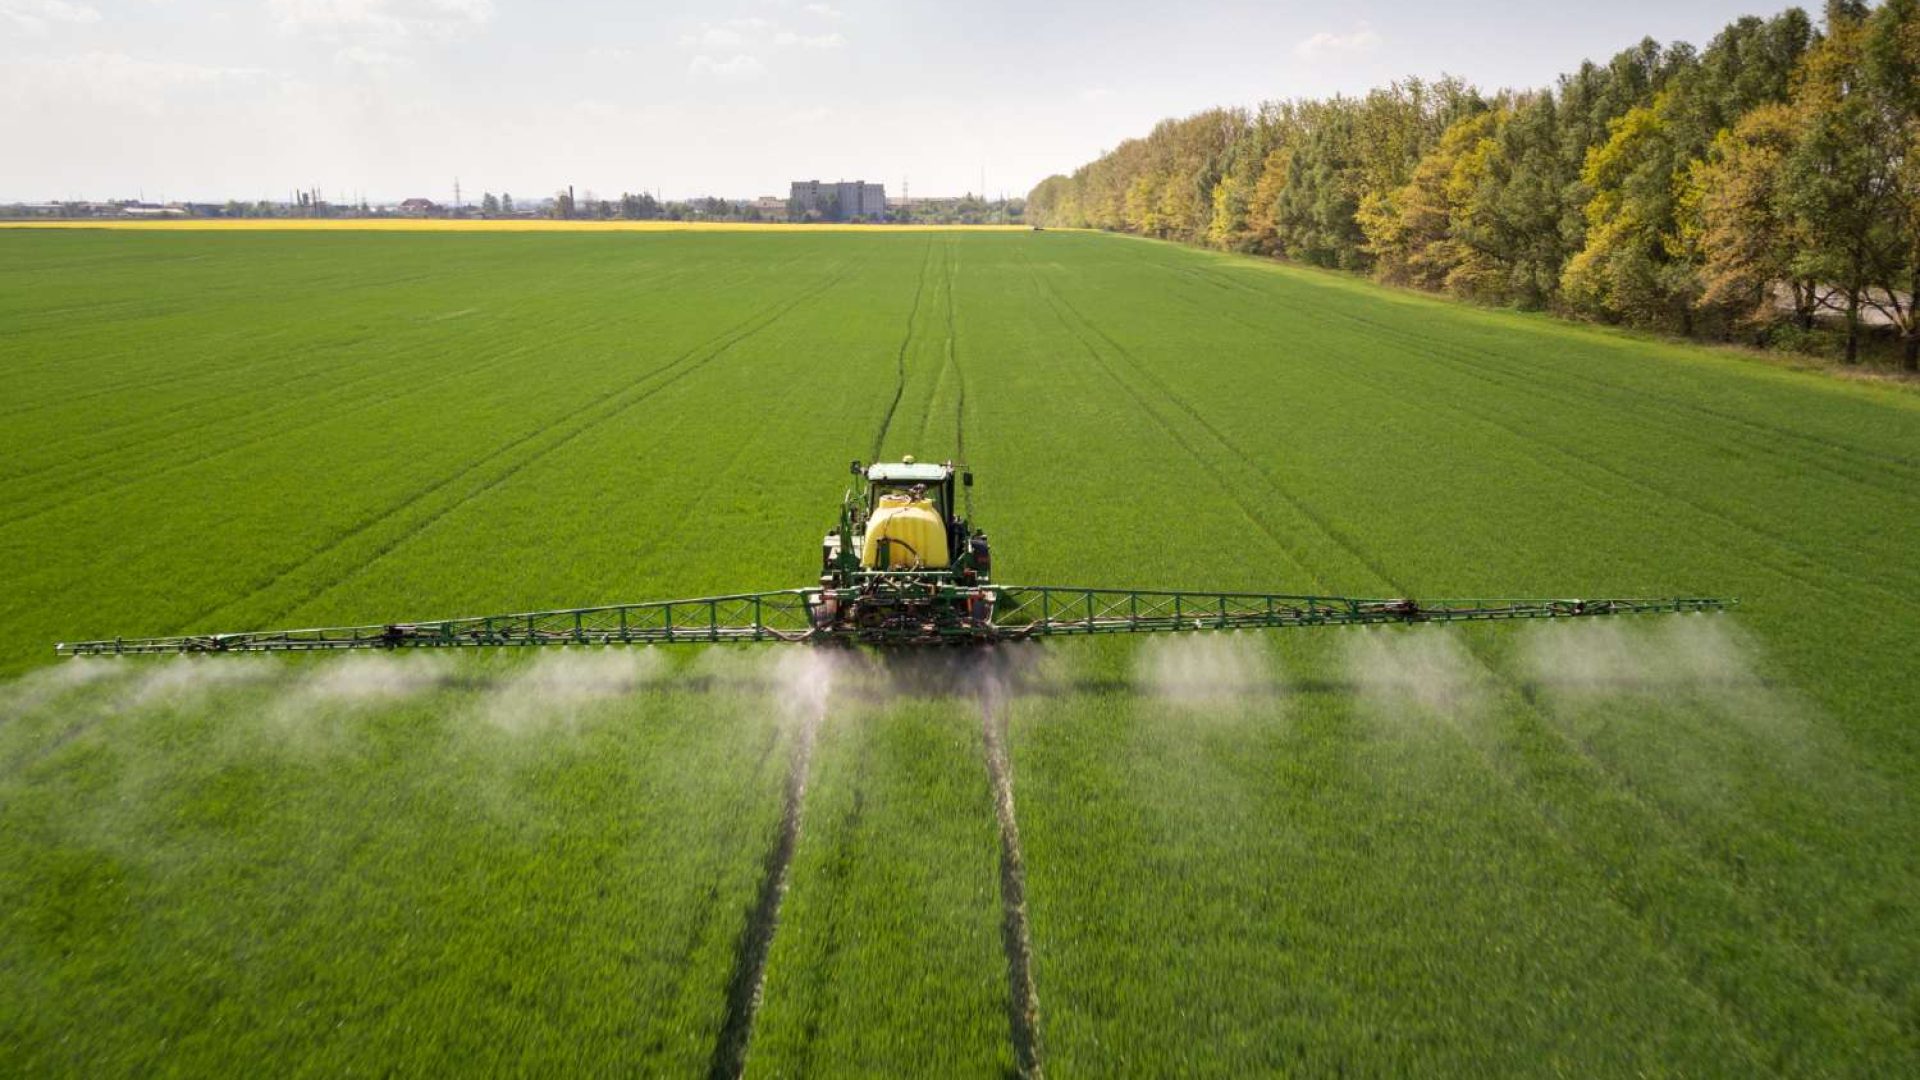 This is the banner image for describing the agrochemicals use.